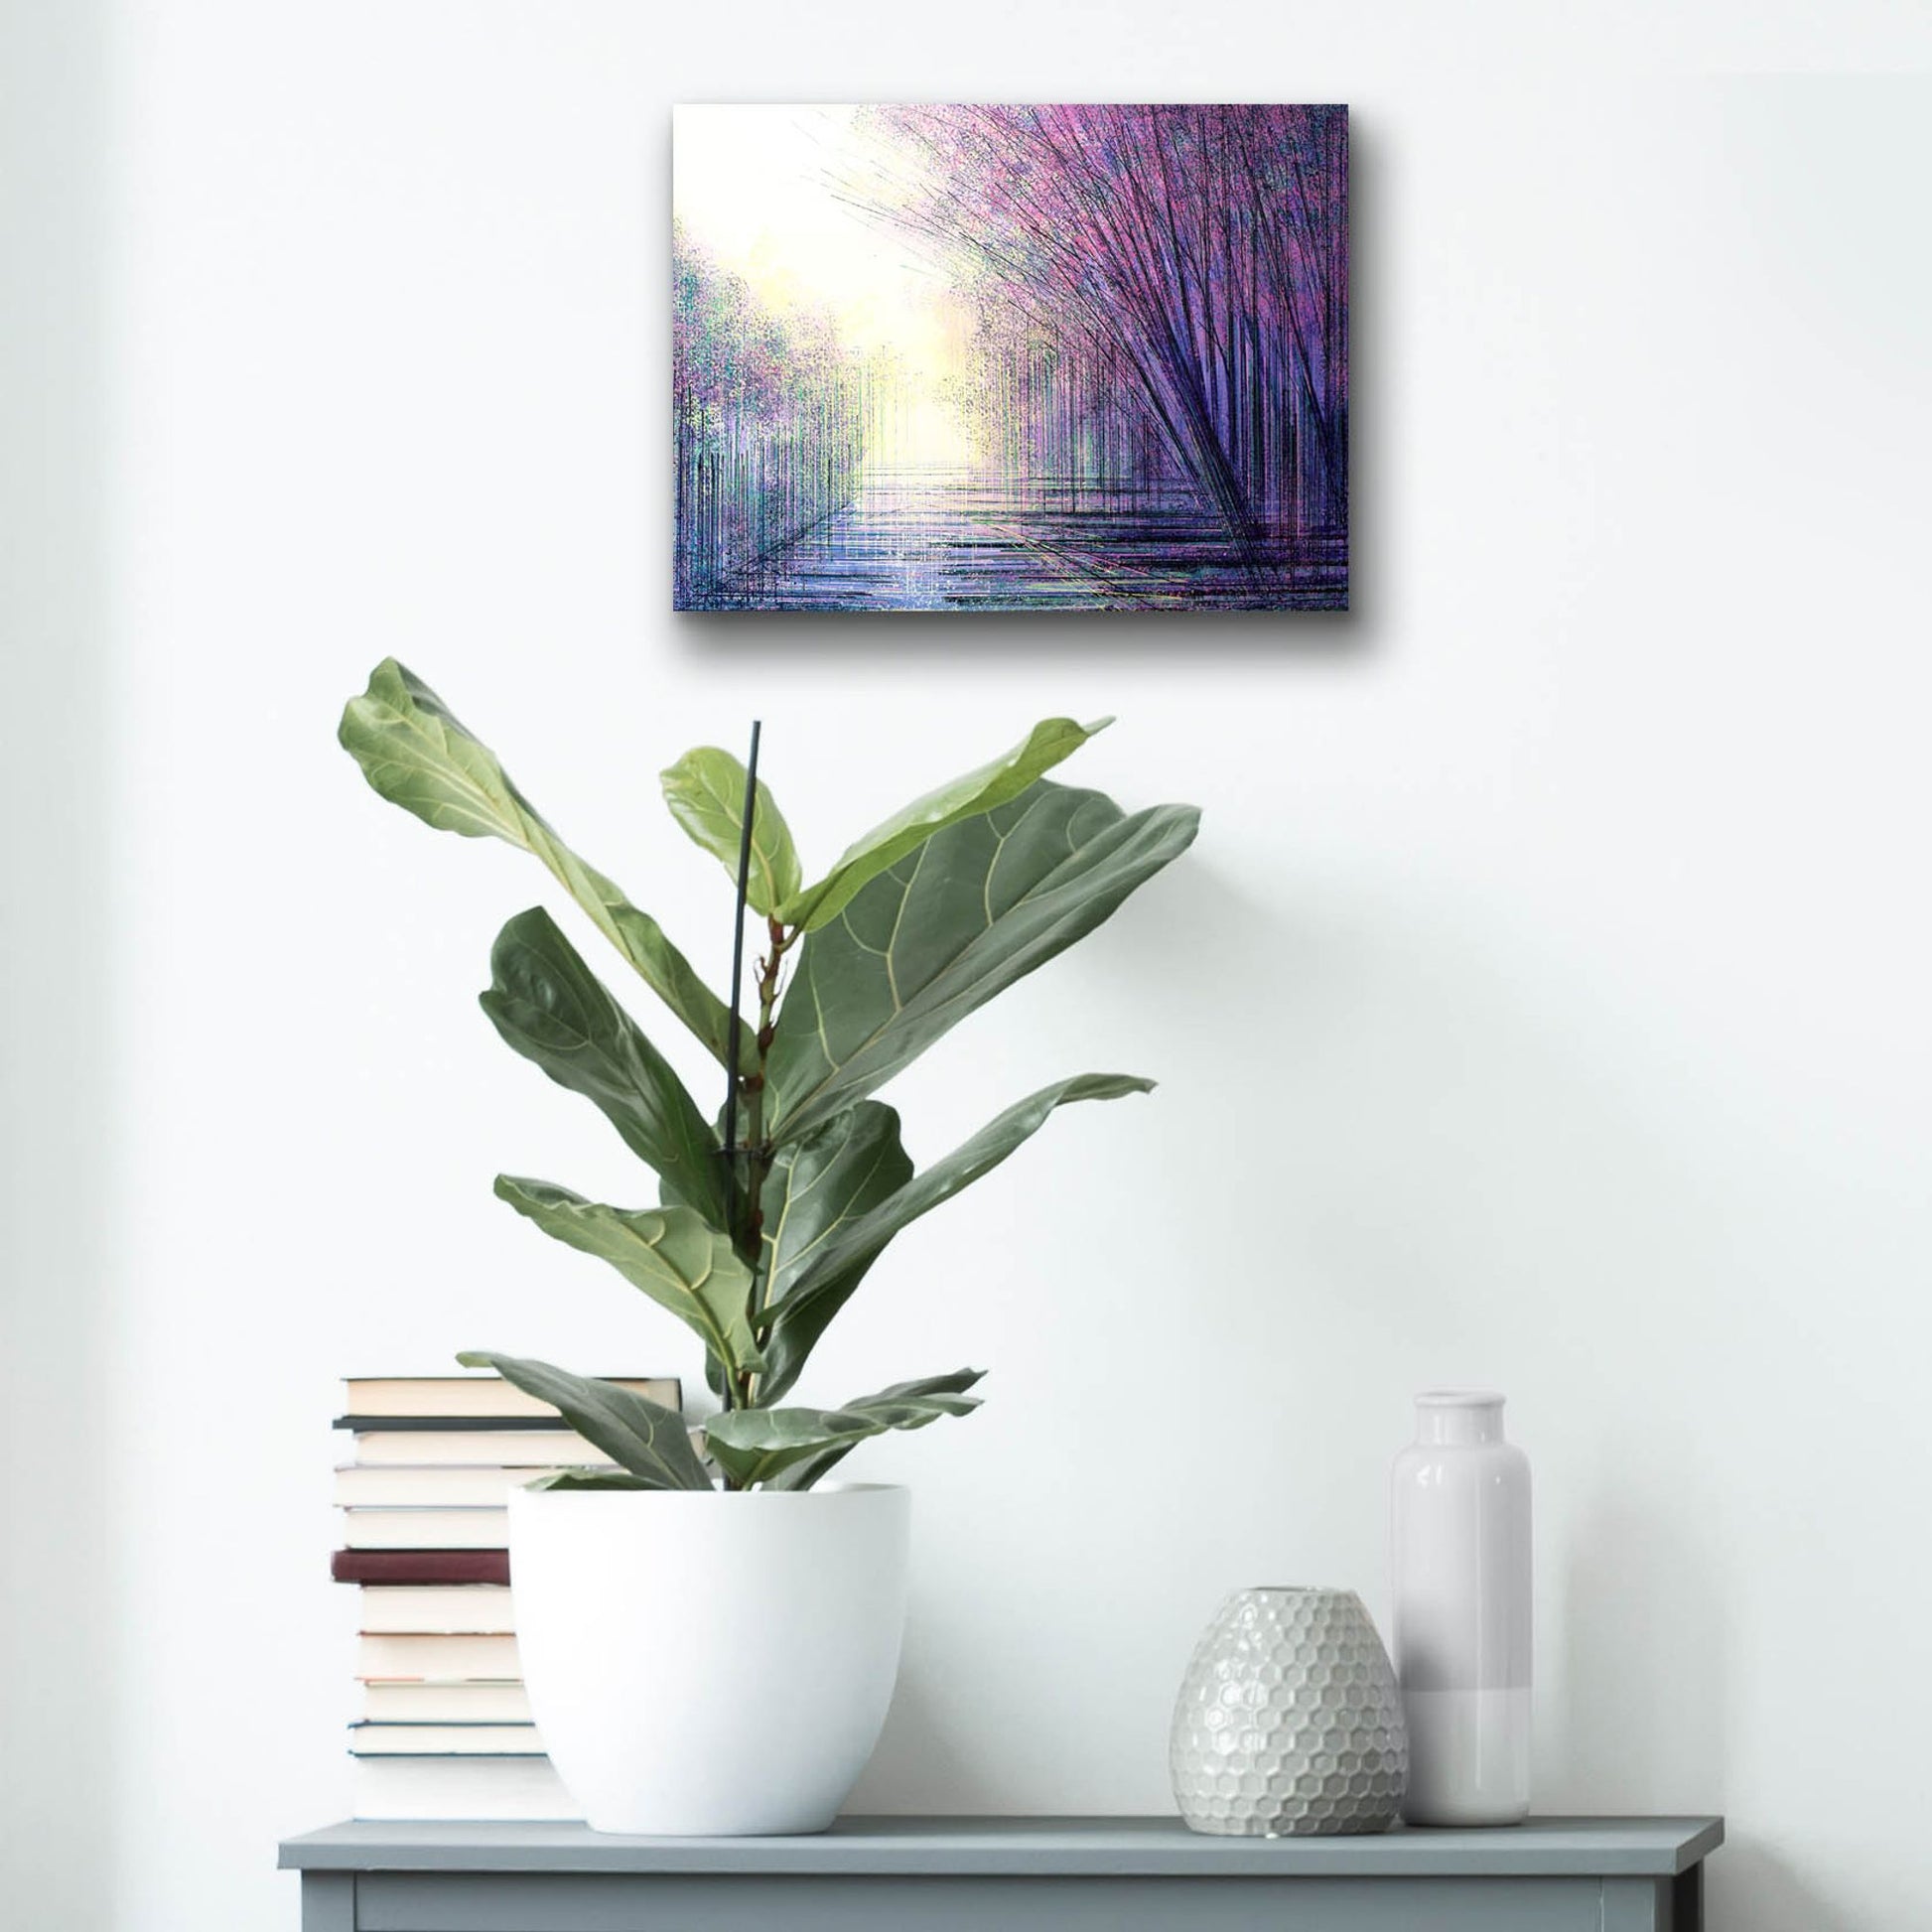 Epic Art 'Spring Blossom At Twilight' by Marc Todd, Acrylic Glass Wall Art,16x12